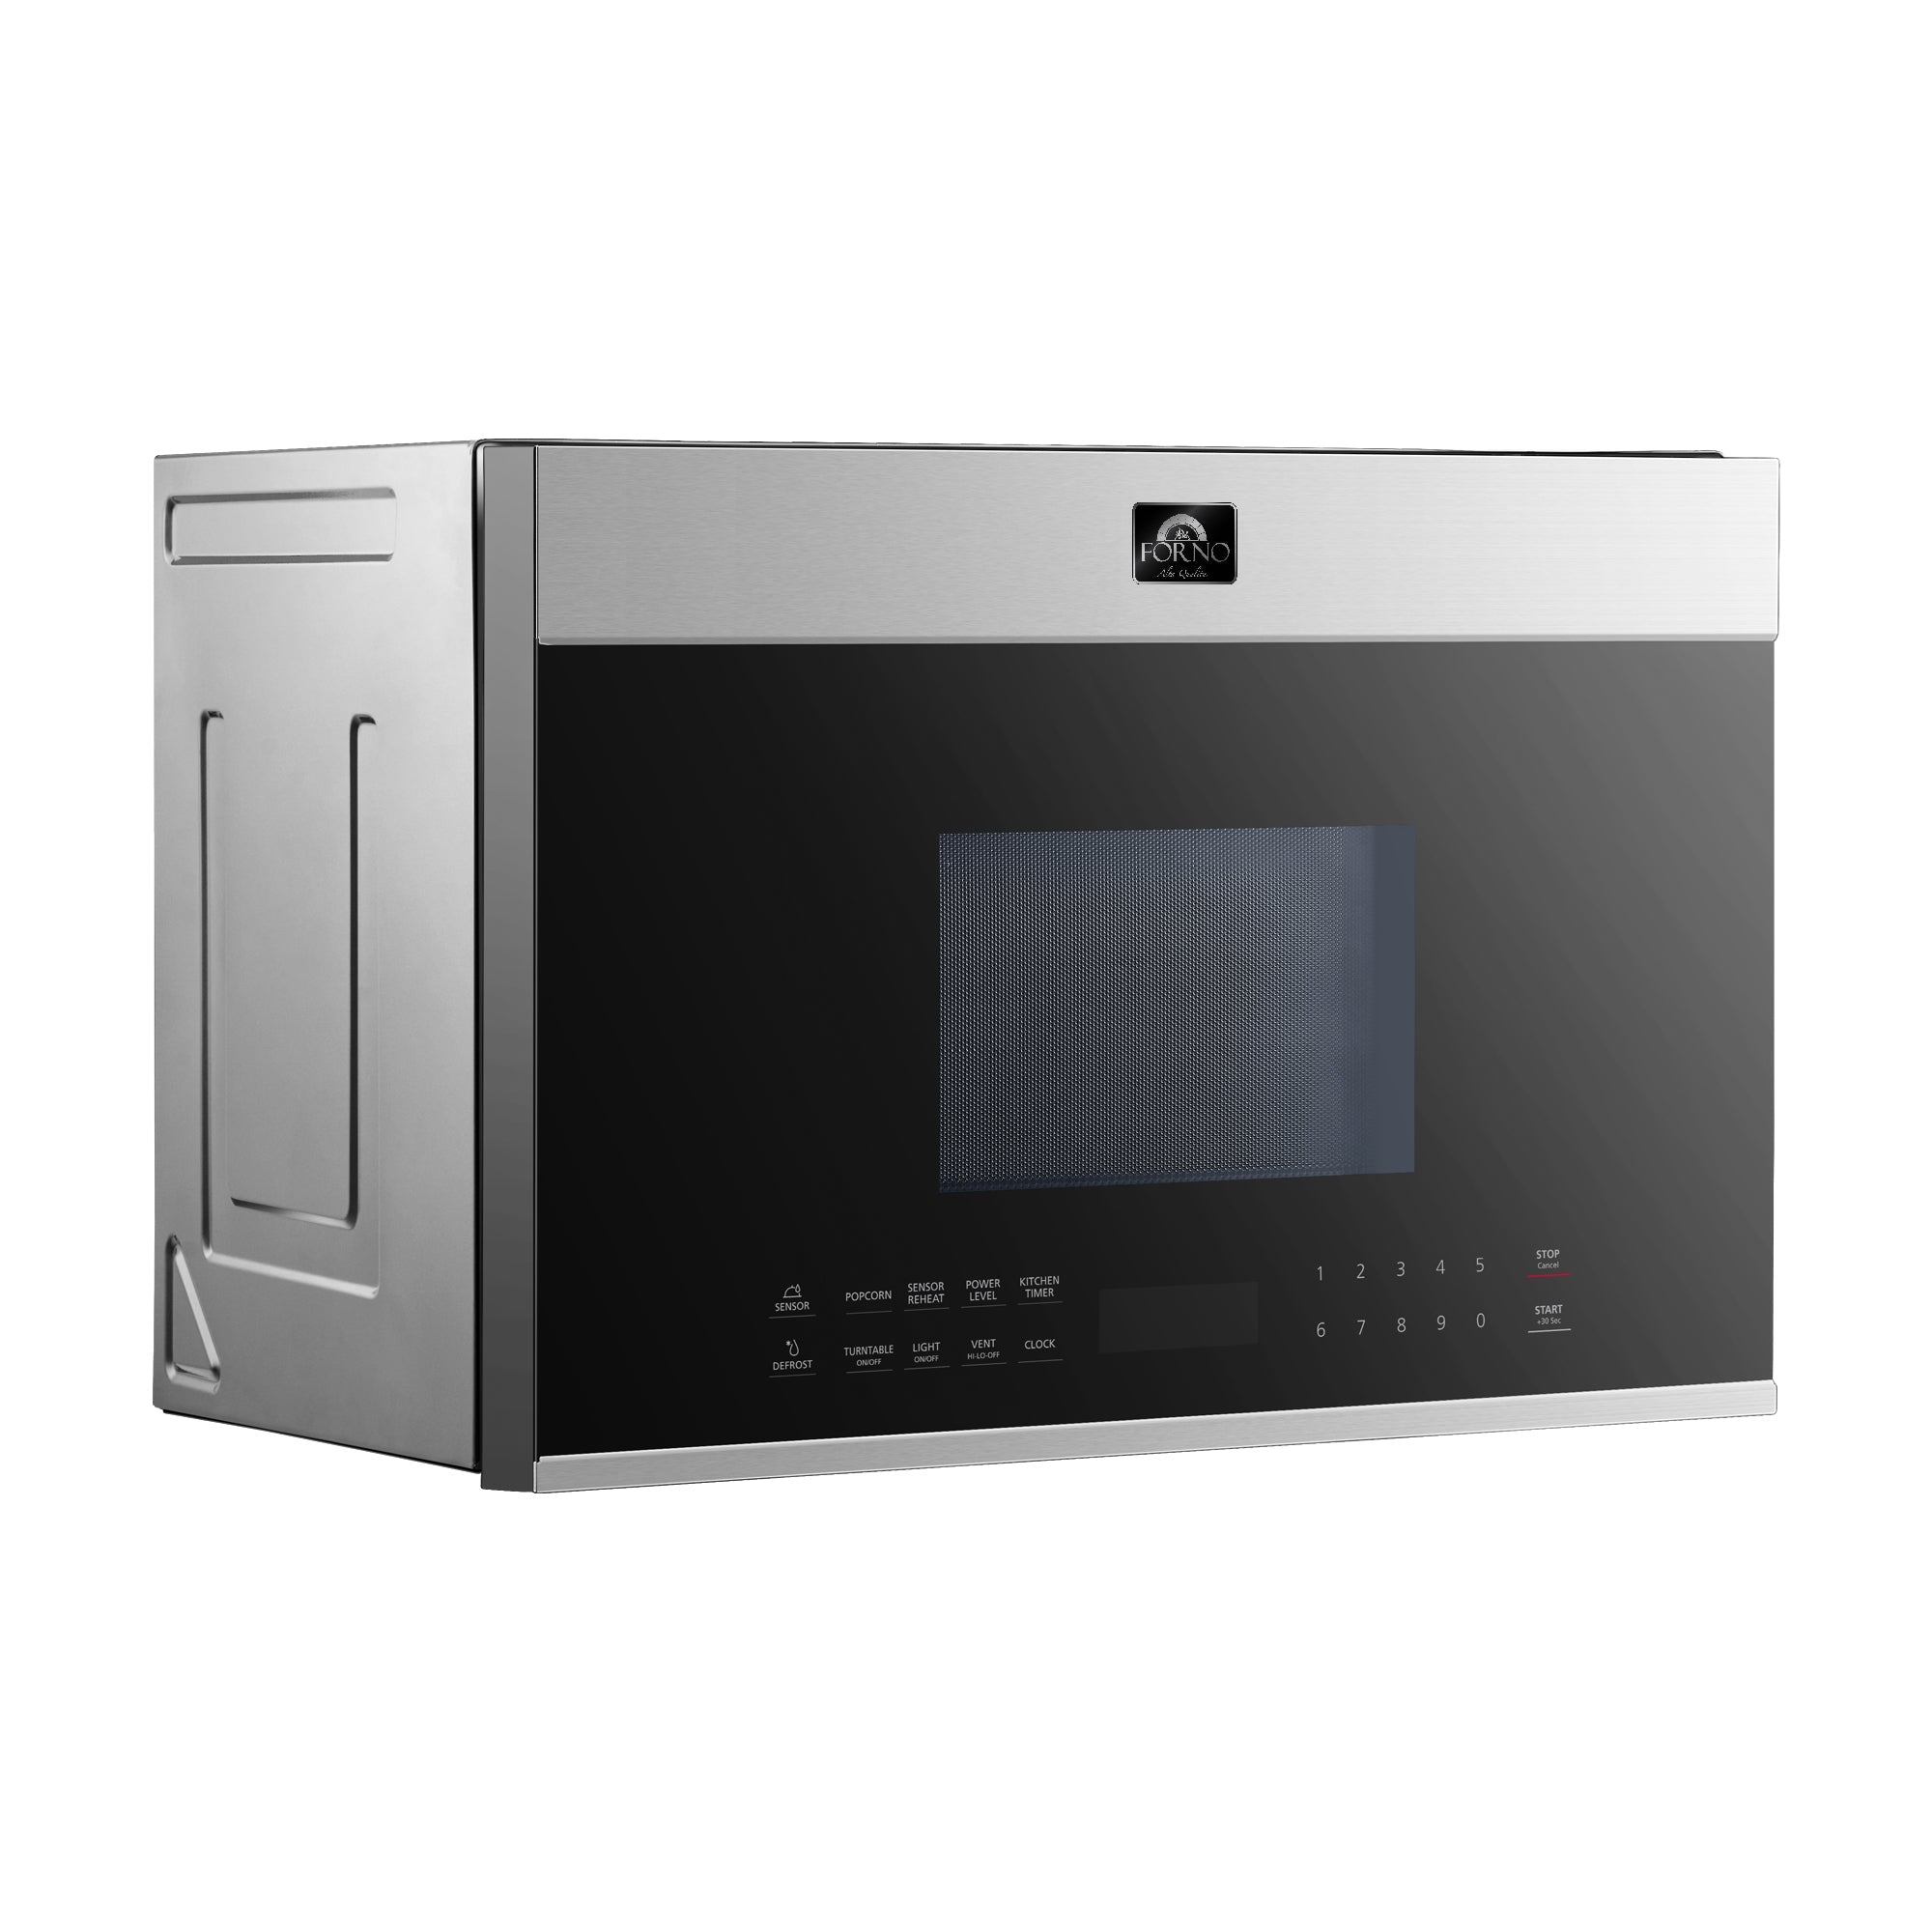 Forno Capriolo - 24 in. OTR Stainless Steel Microwave Oven 1.3 cu.ft.